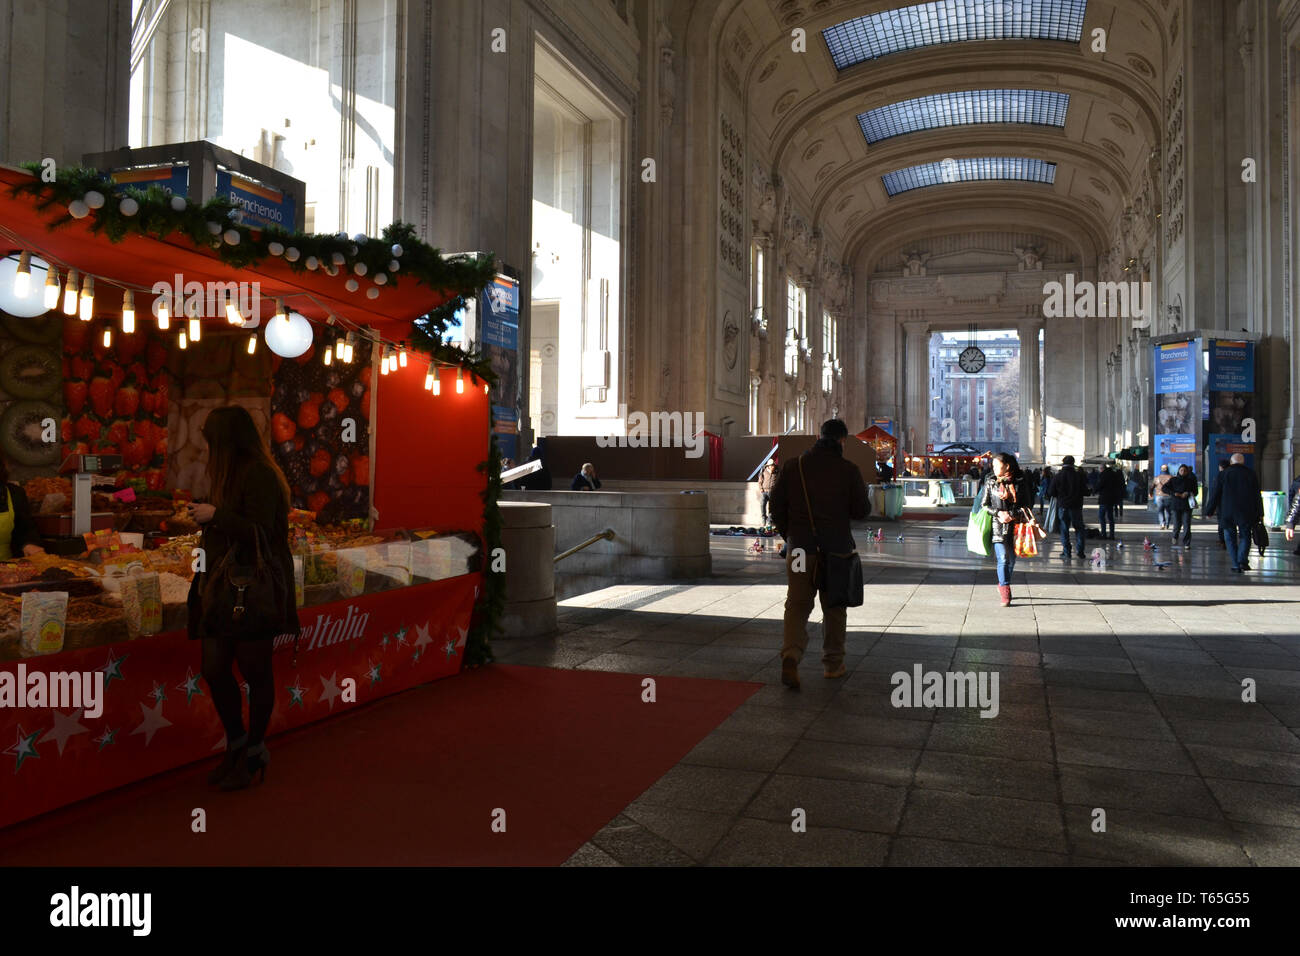 Milan/Italy - January 15, 2014: Traditional Italian Christmas market stalls decorated with the red fabric and red carpet inside the Central station. Stock Photo